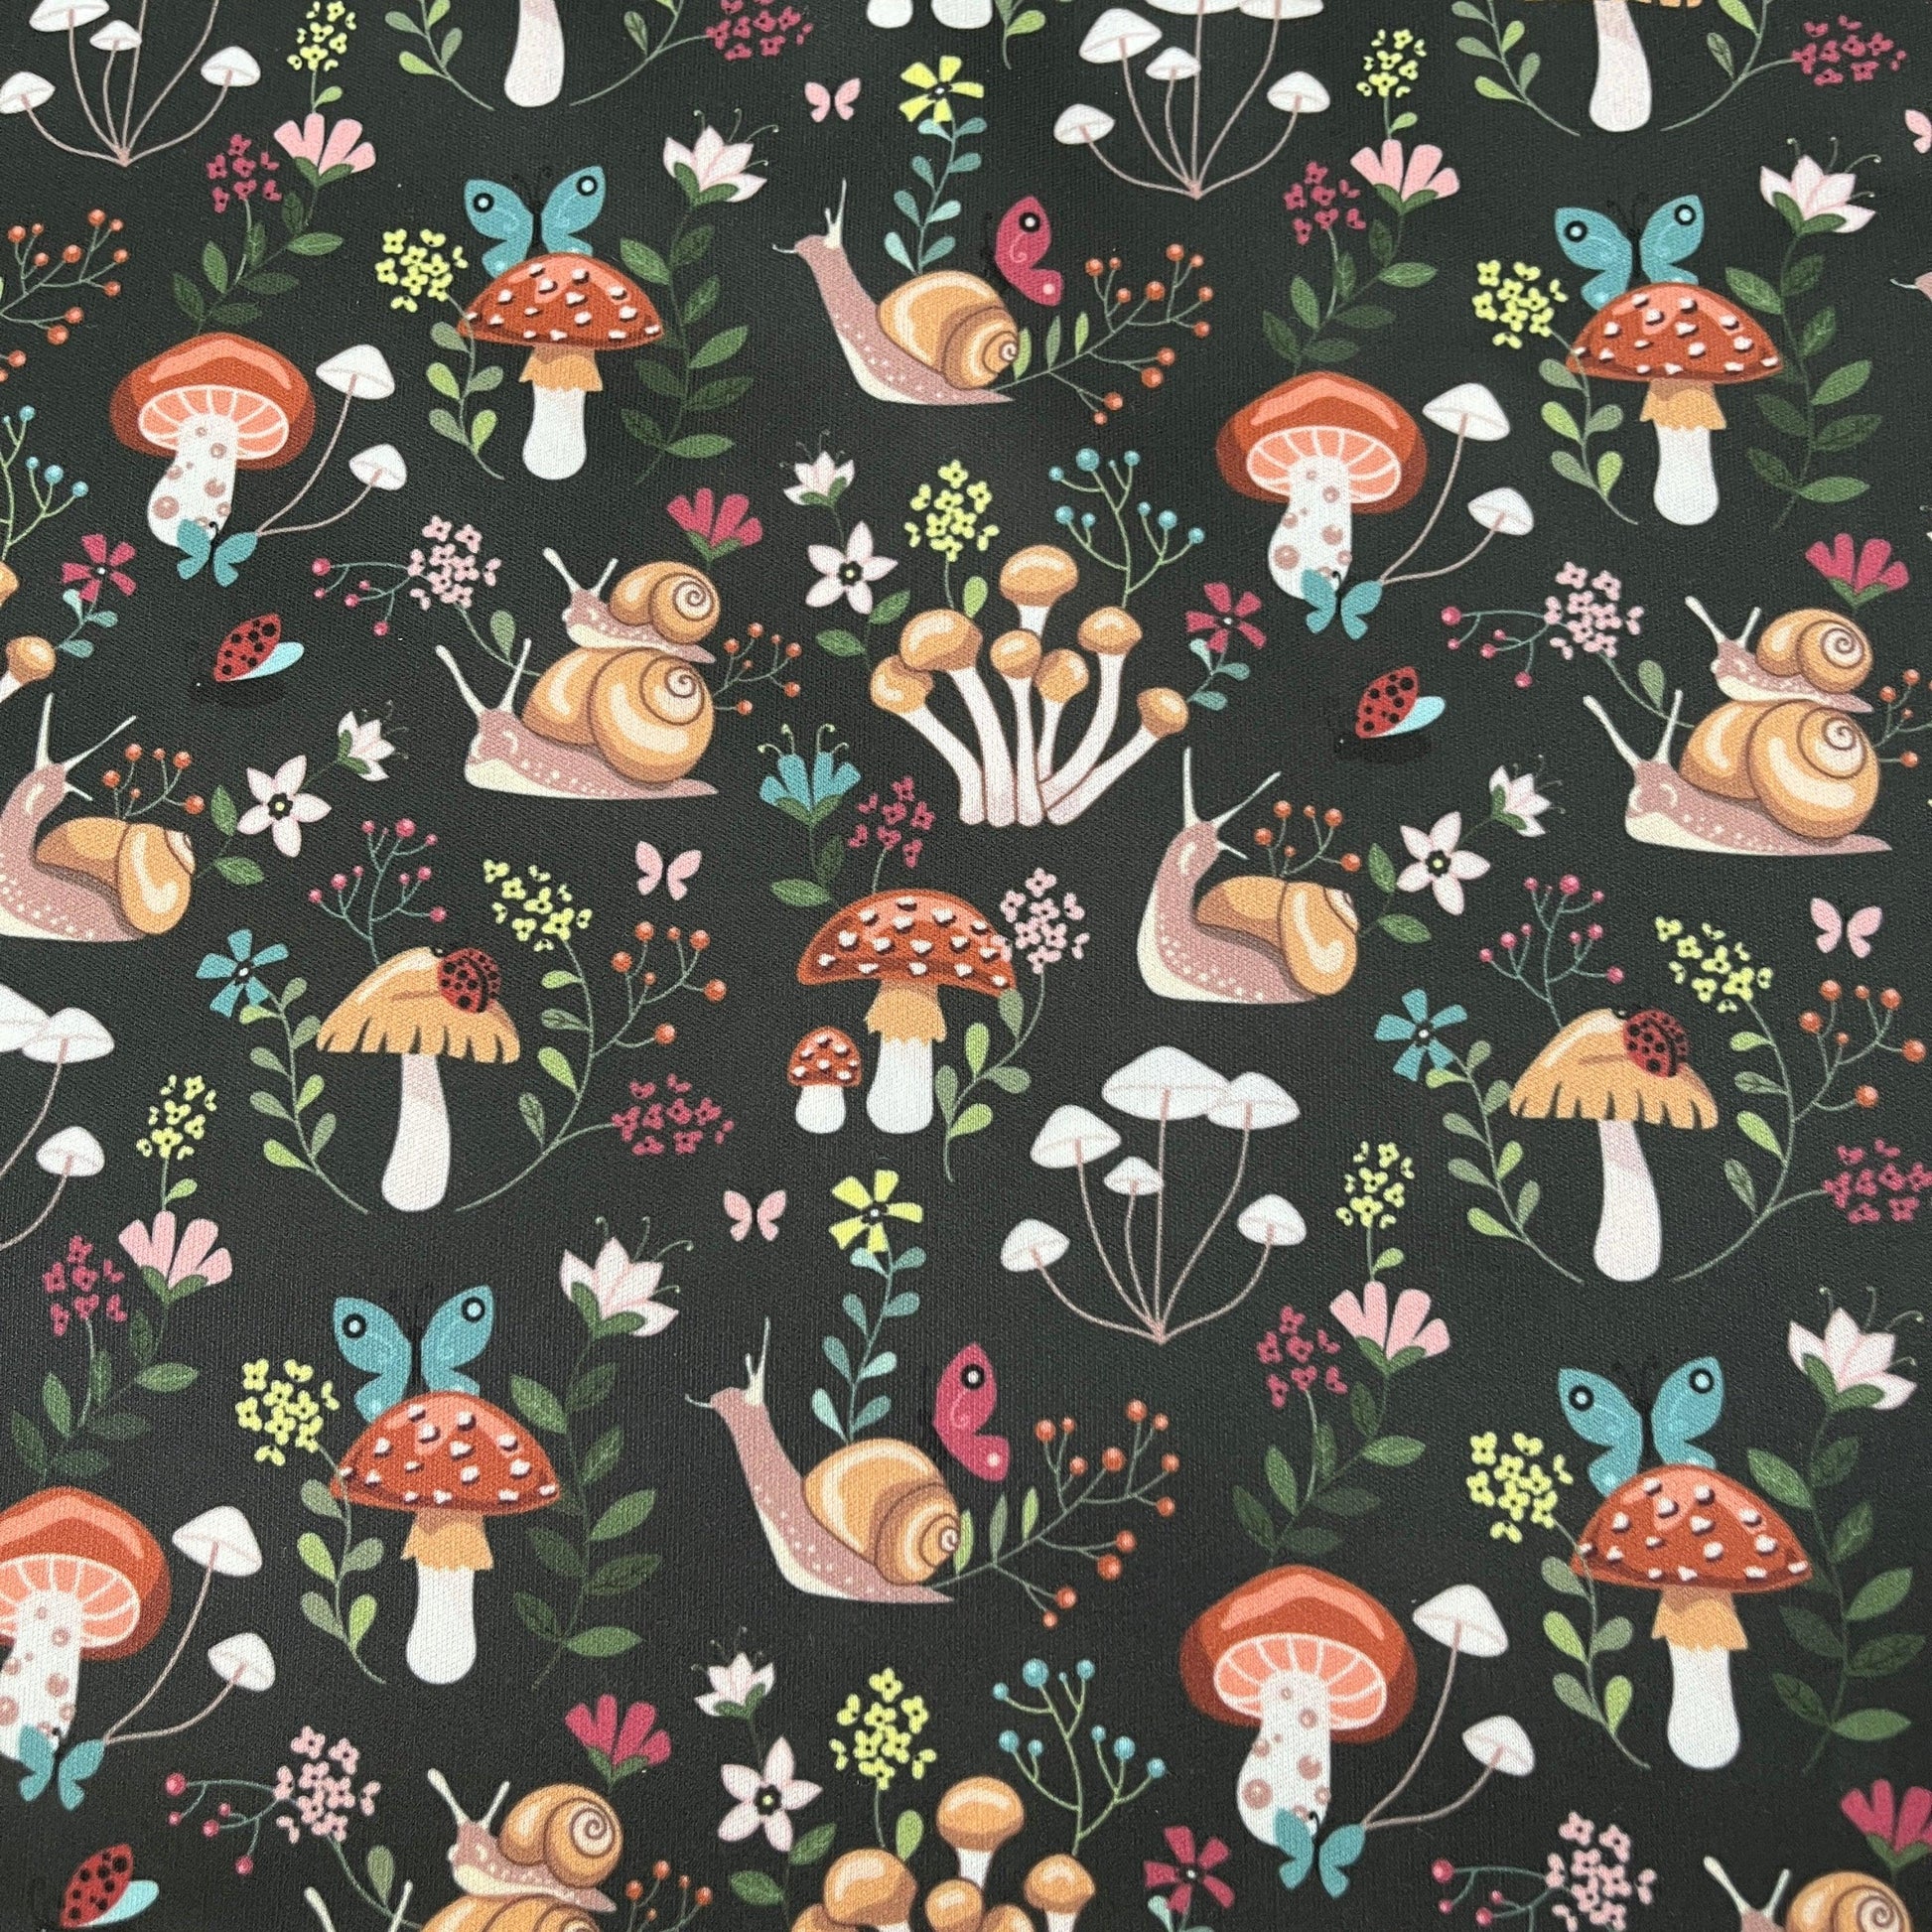 Snails and Mushrooms 1 mil PUL Fabric - Made in the USA - Nature's Fabrics